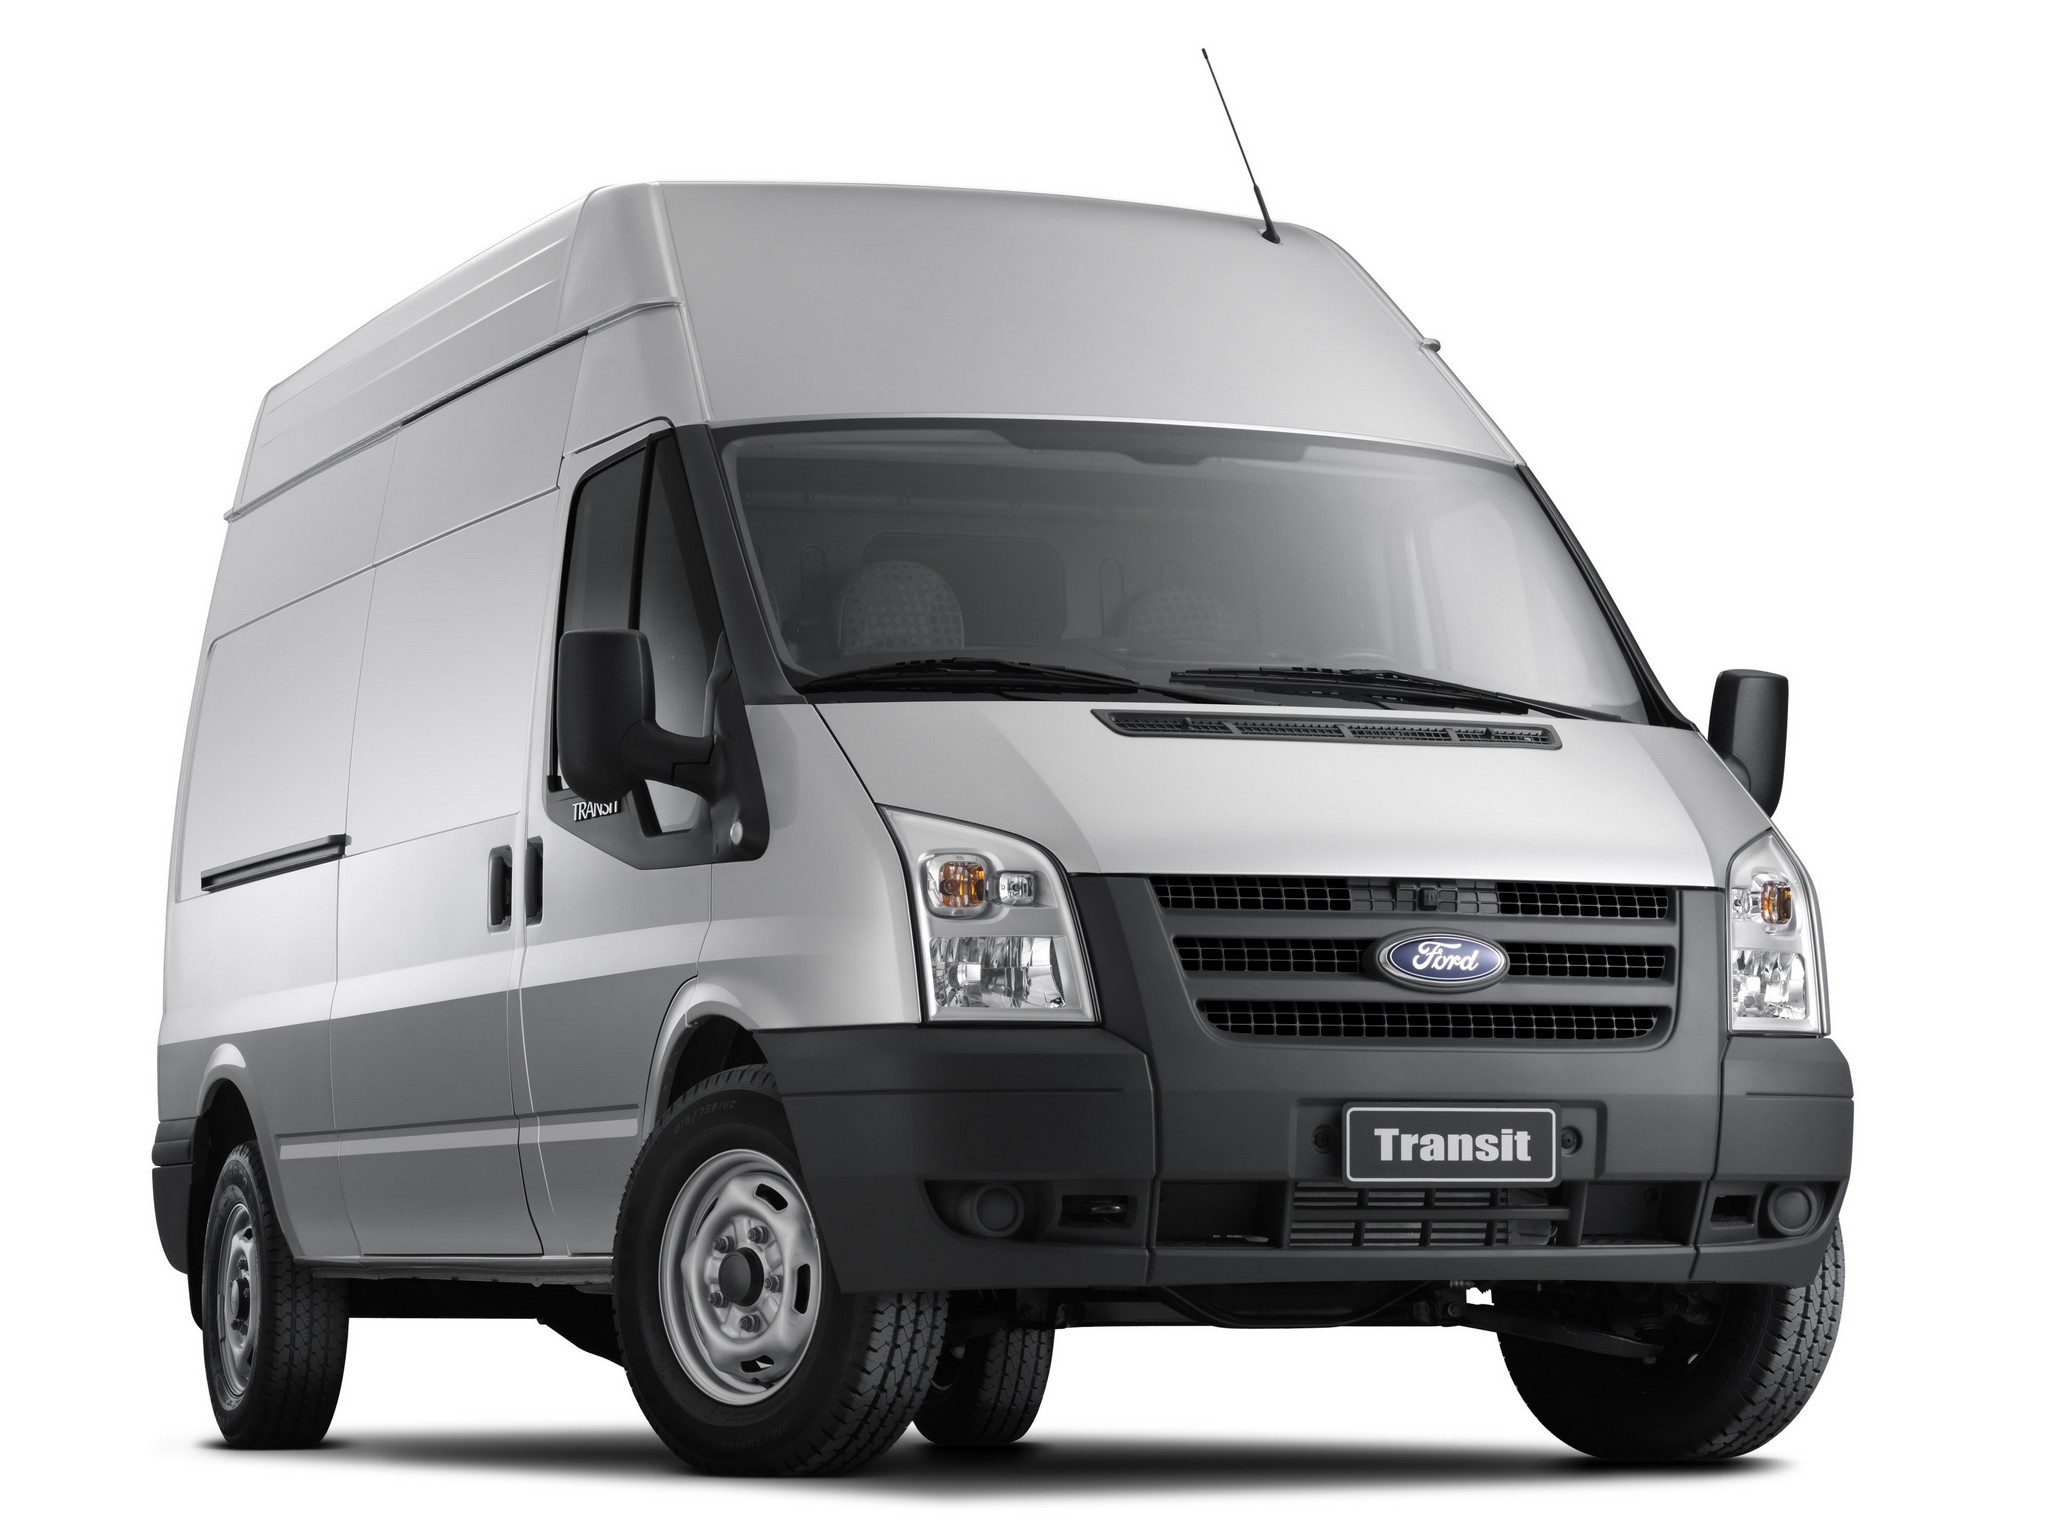 Форд транзит 2006 2014. Ford Transit 2006 2.2. Ford Transit 6. Ford Transit LWB van 2006. Ford Transit v347.